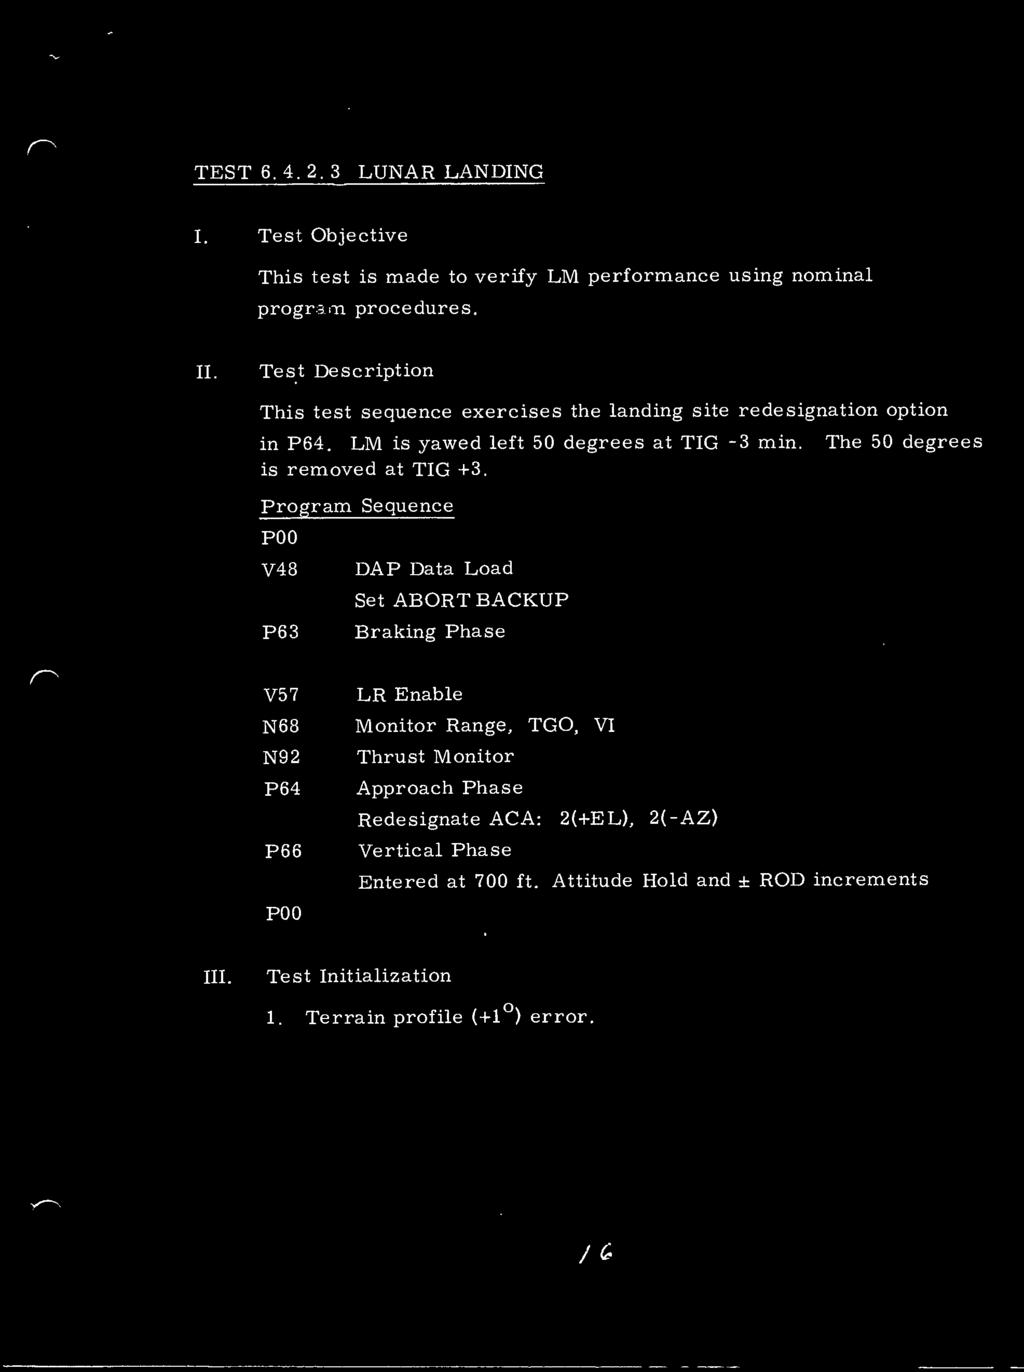 TEST 6. 4. 2. 3 LUNAR LANDING This test is made to verify LM performance using nominal program procedures. This test sequence exercises the landing site redesignation option in P64.